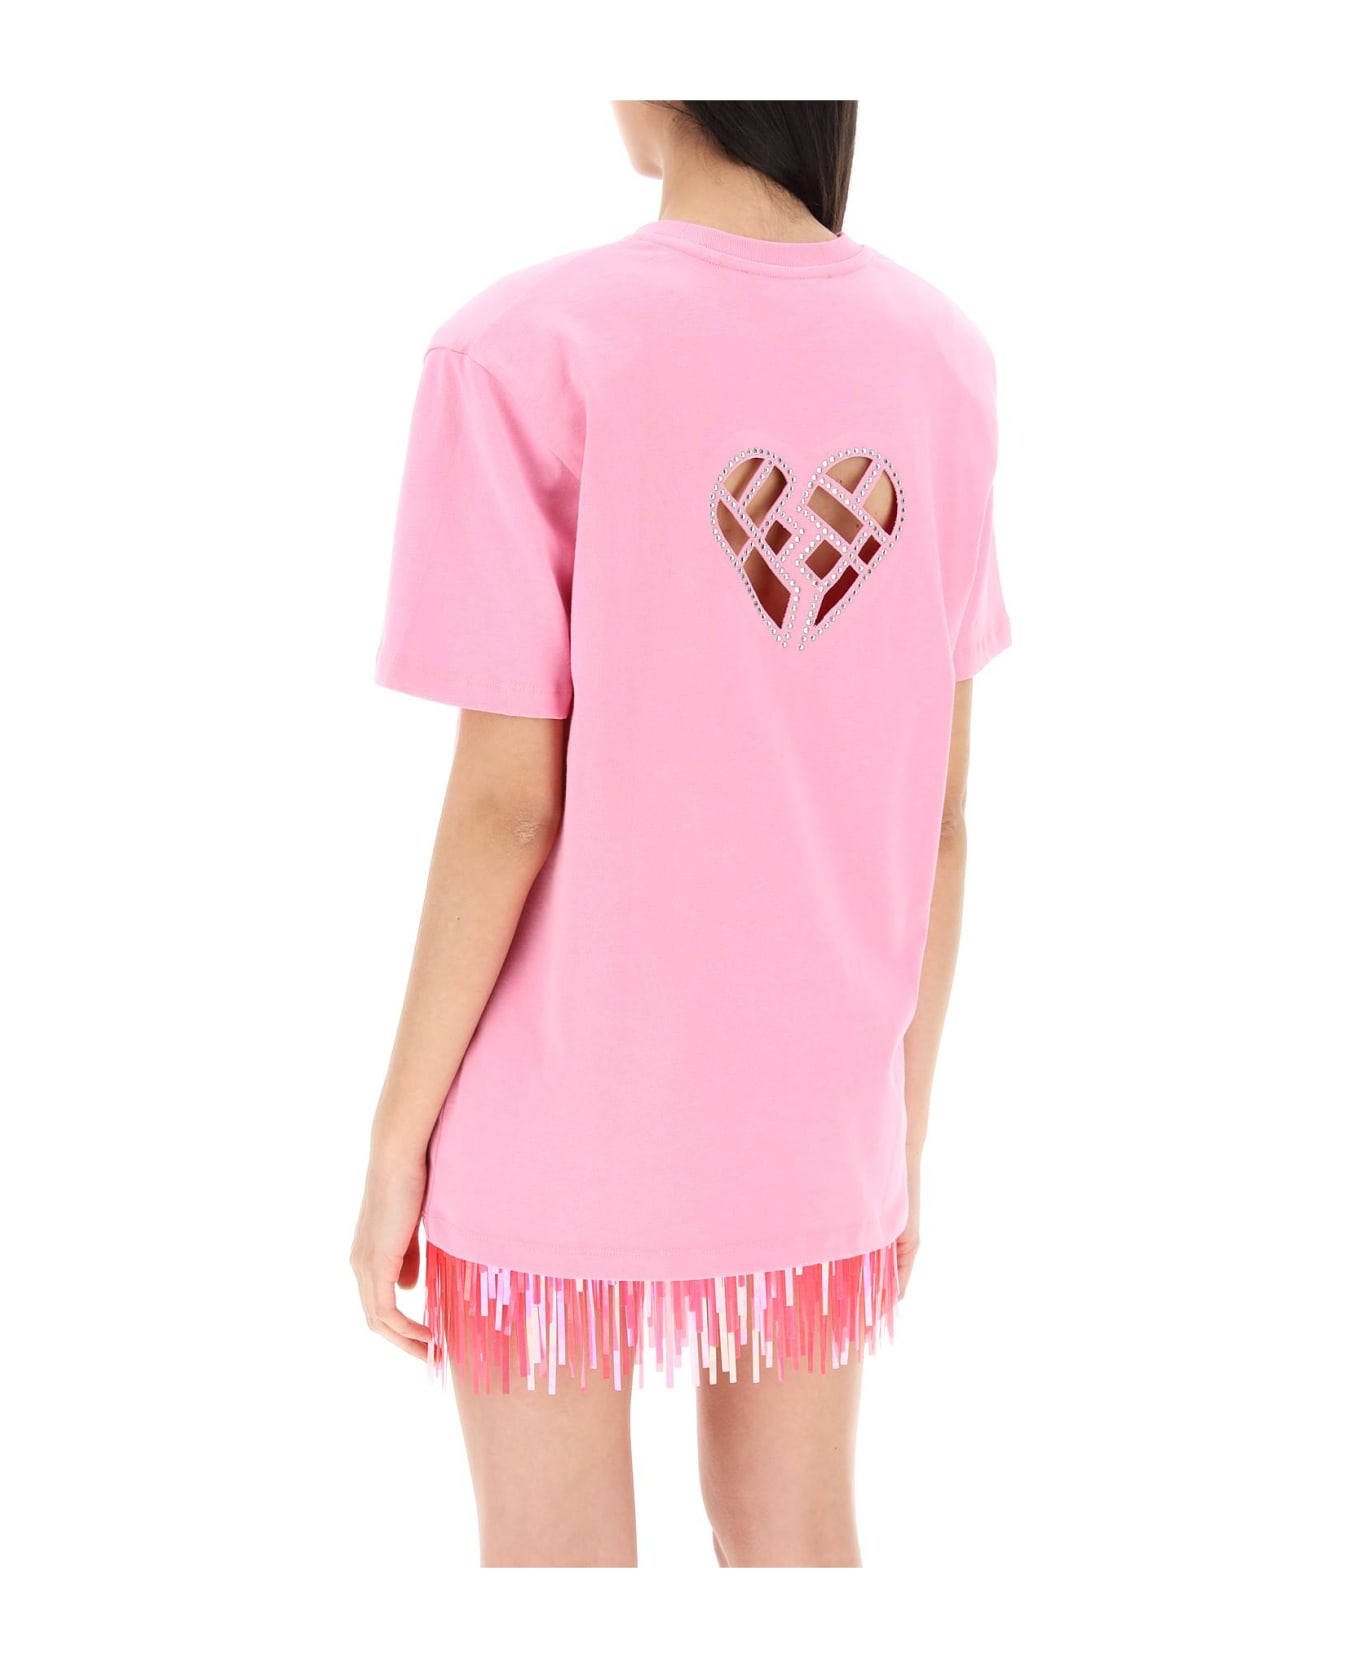 Rotate by Birger Christensen Crystal Cut-out T-shirt - BEGONIA PINK (Pink)